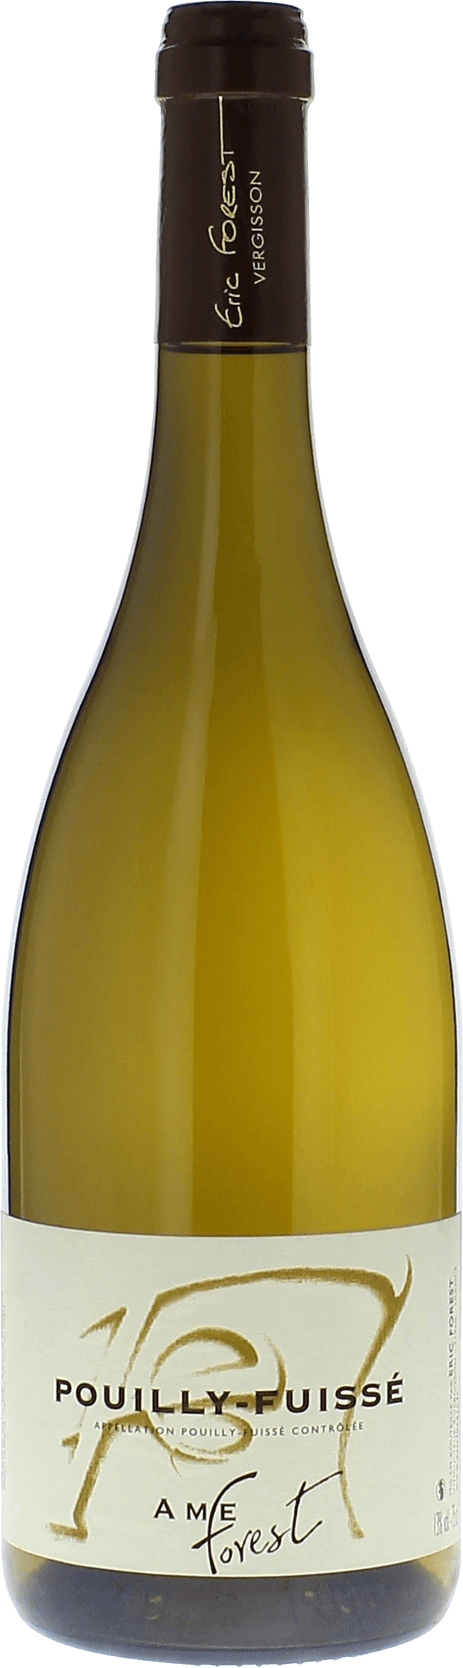 Pouilly fuiss ame 2018 Domaine Eric Forest, Bourgogne blanc